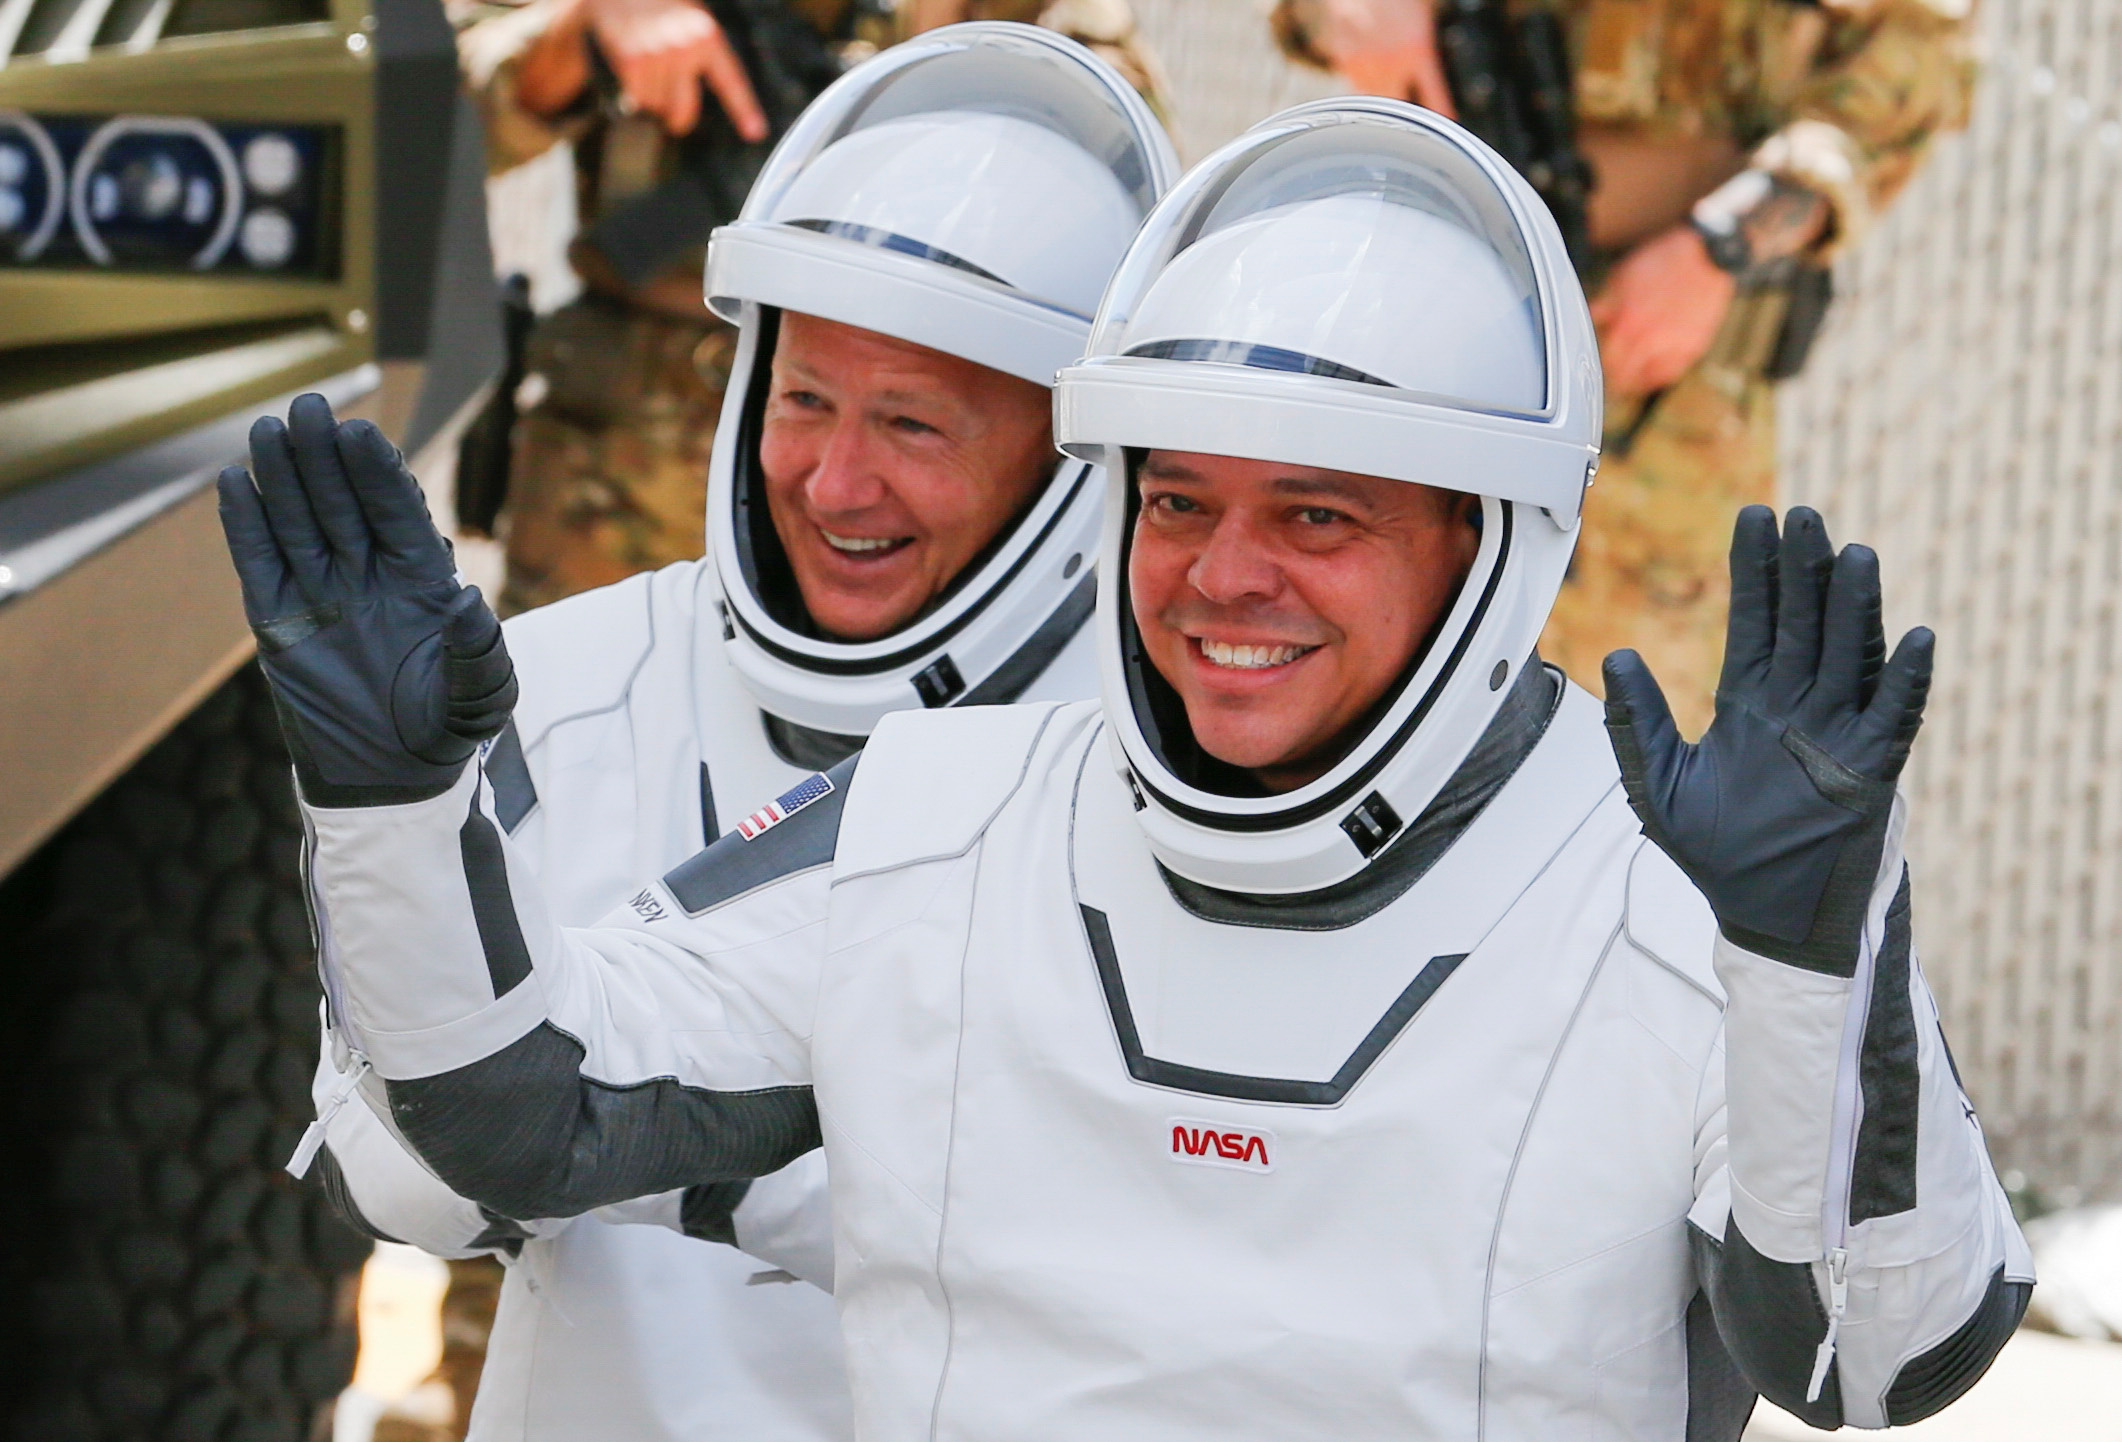 SpaceX astronauts will receive the Congressional Space Medal of Honor #GeekLeap